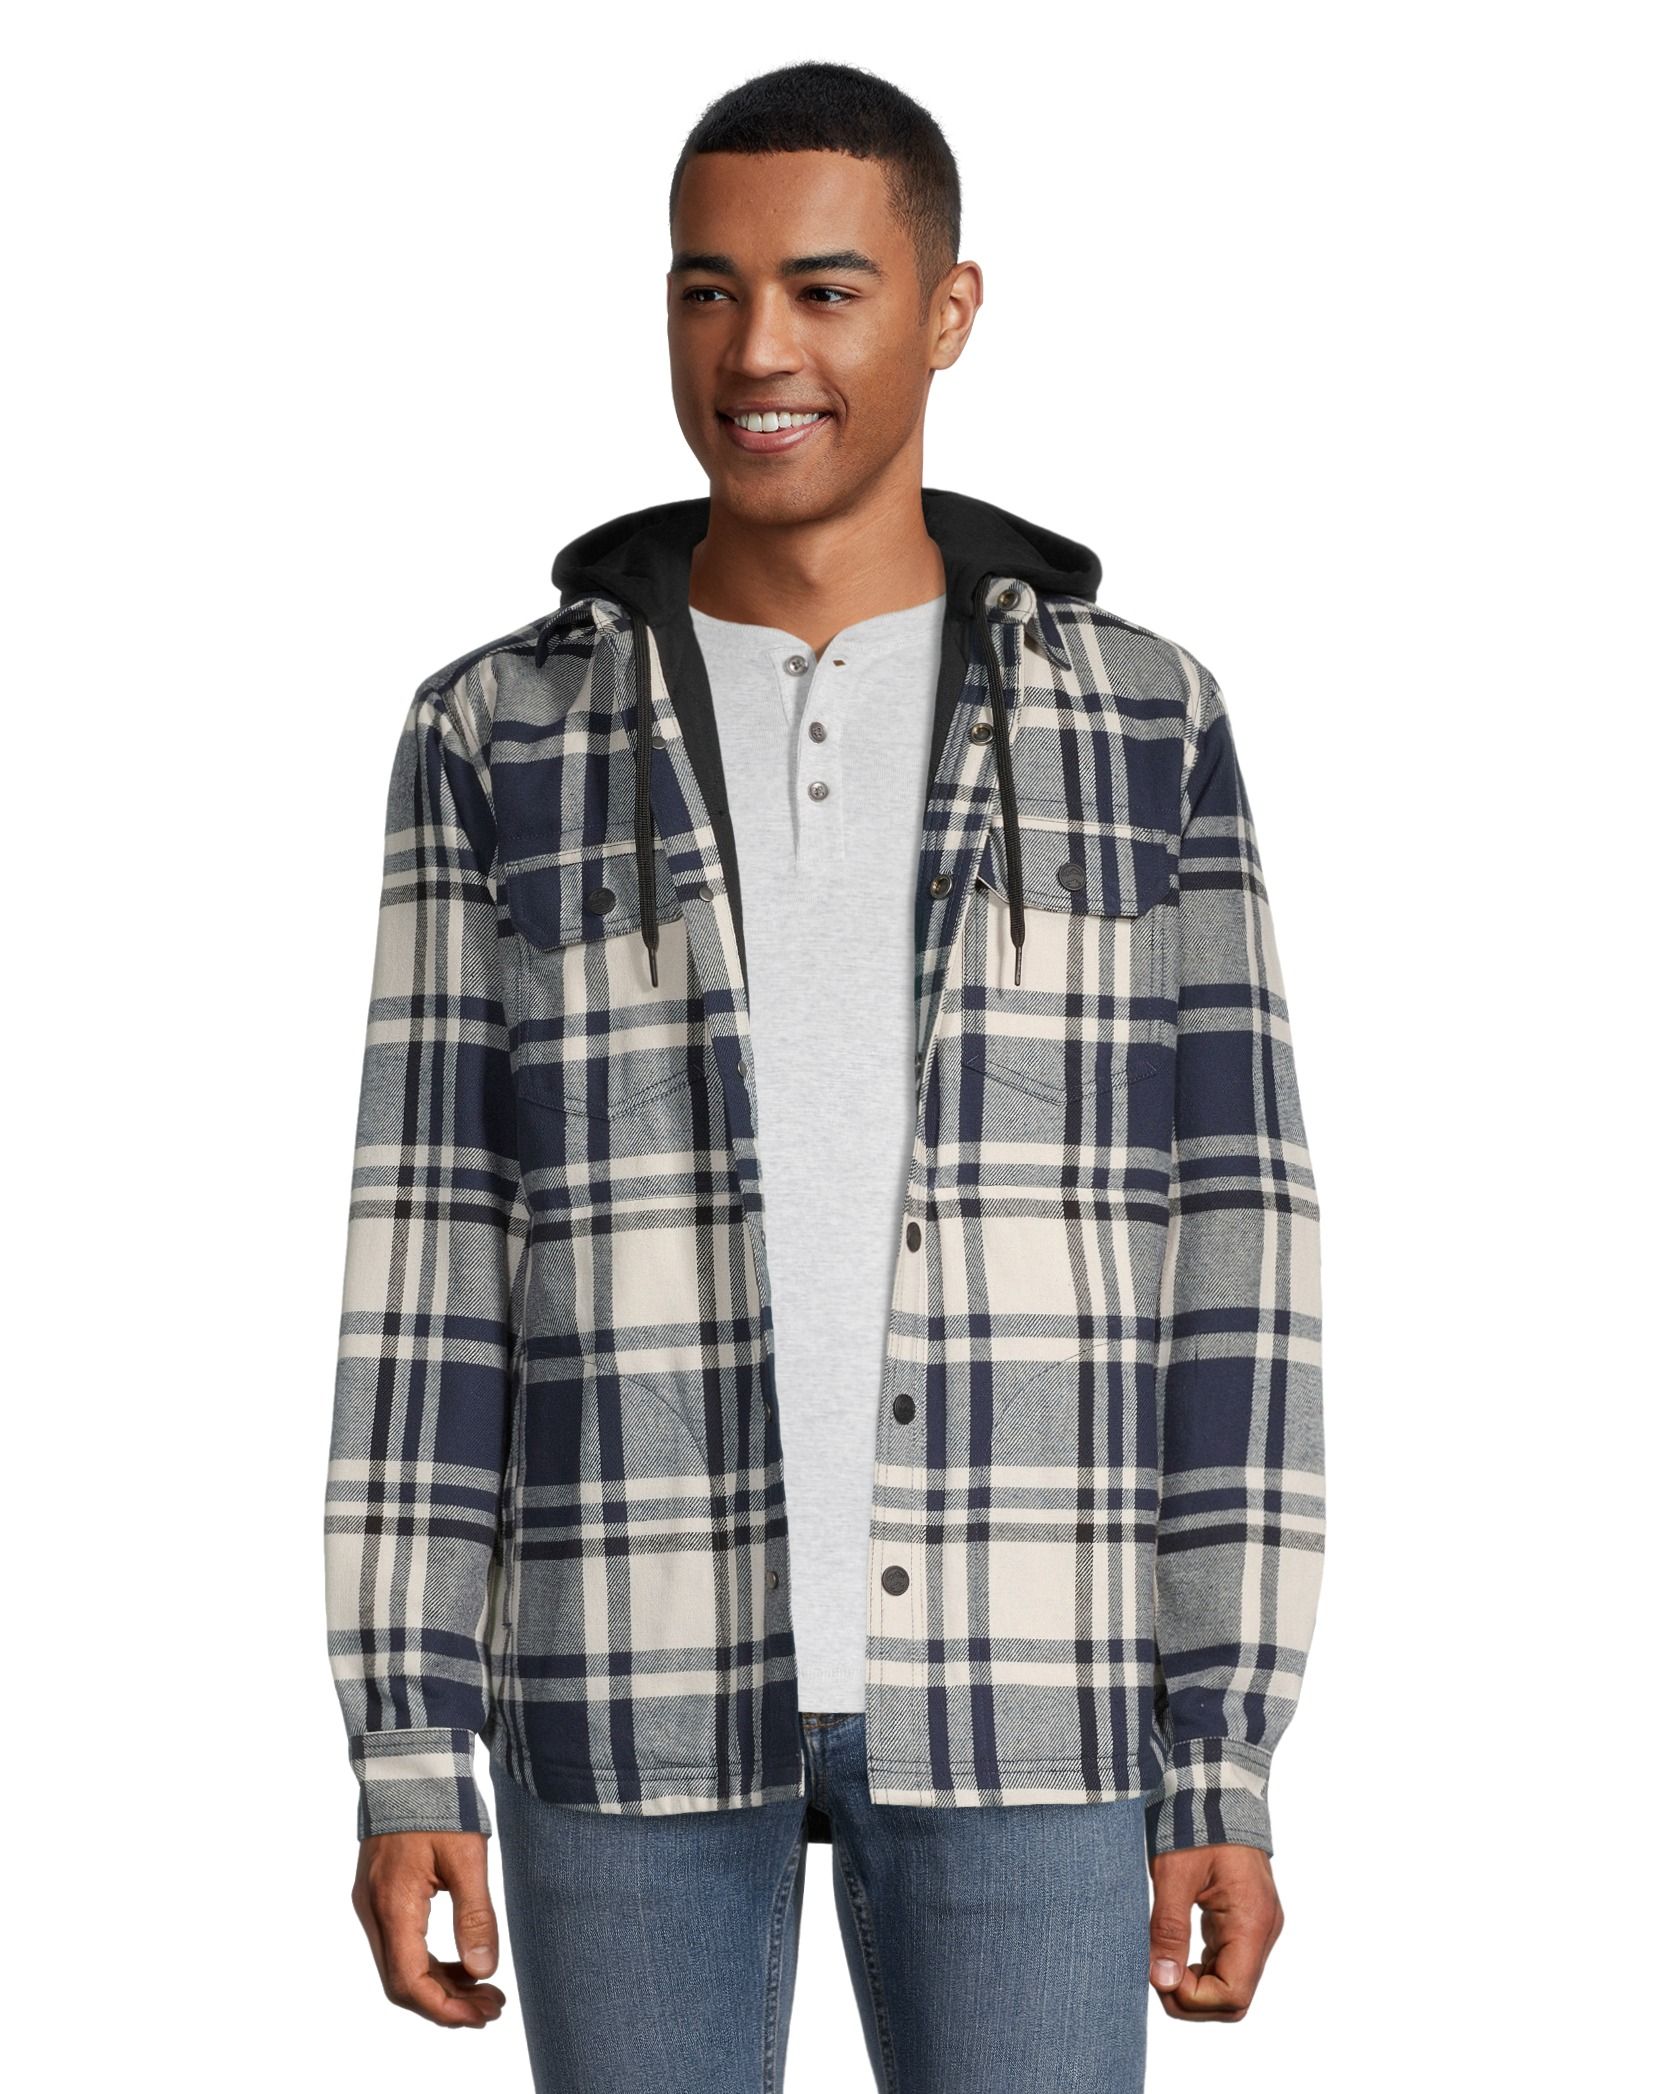 https://media-www.marks.com/product/marks-work-wearhouse/mens-world/mens-woven/410034291723/windriver-men-s-lined-t-max-insulated-flannel-hooded-cotton-shacket-0a9fa9b5-6239-47fe-8aa6-af80ca96c22d-jpgrendition.jpg